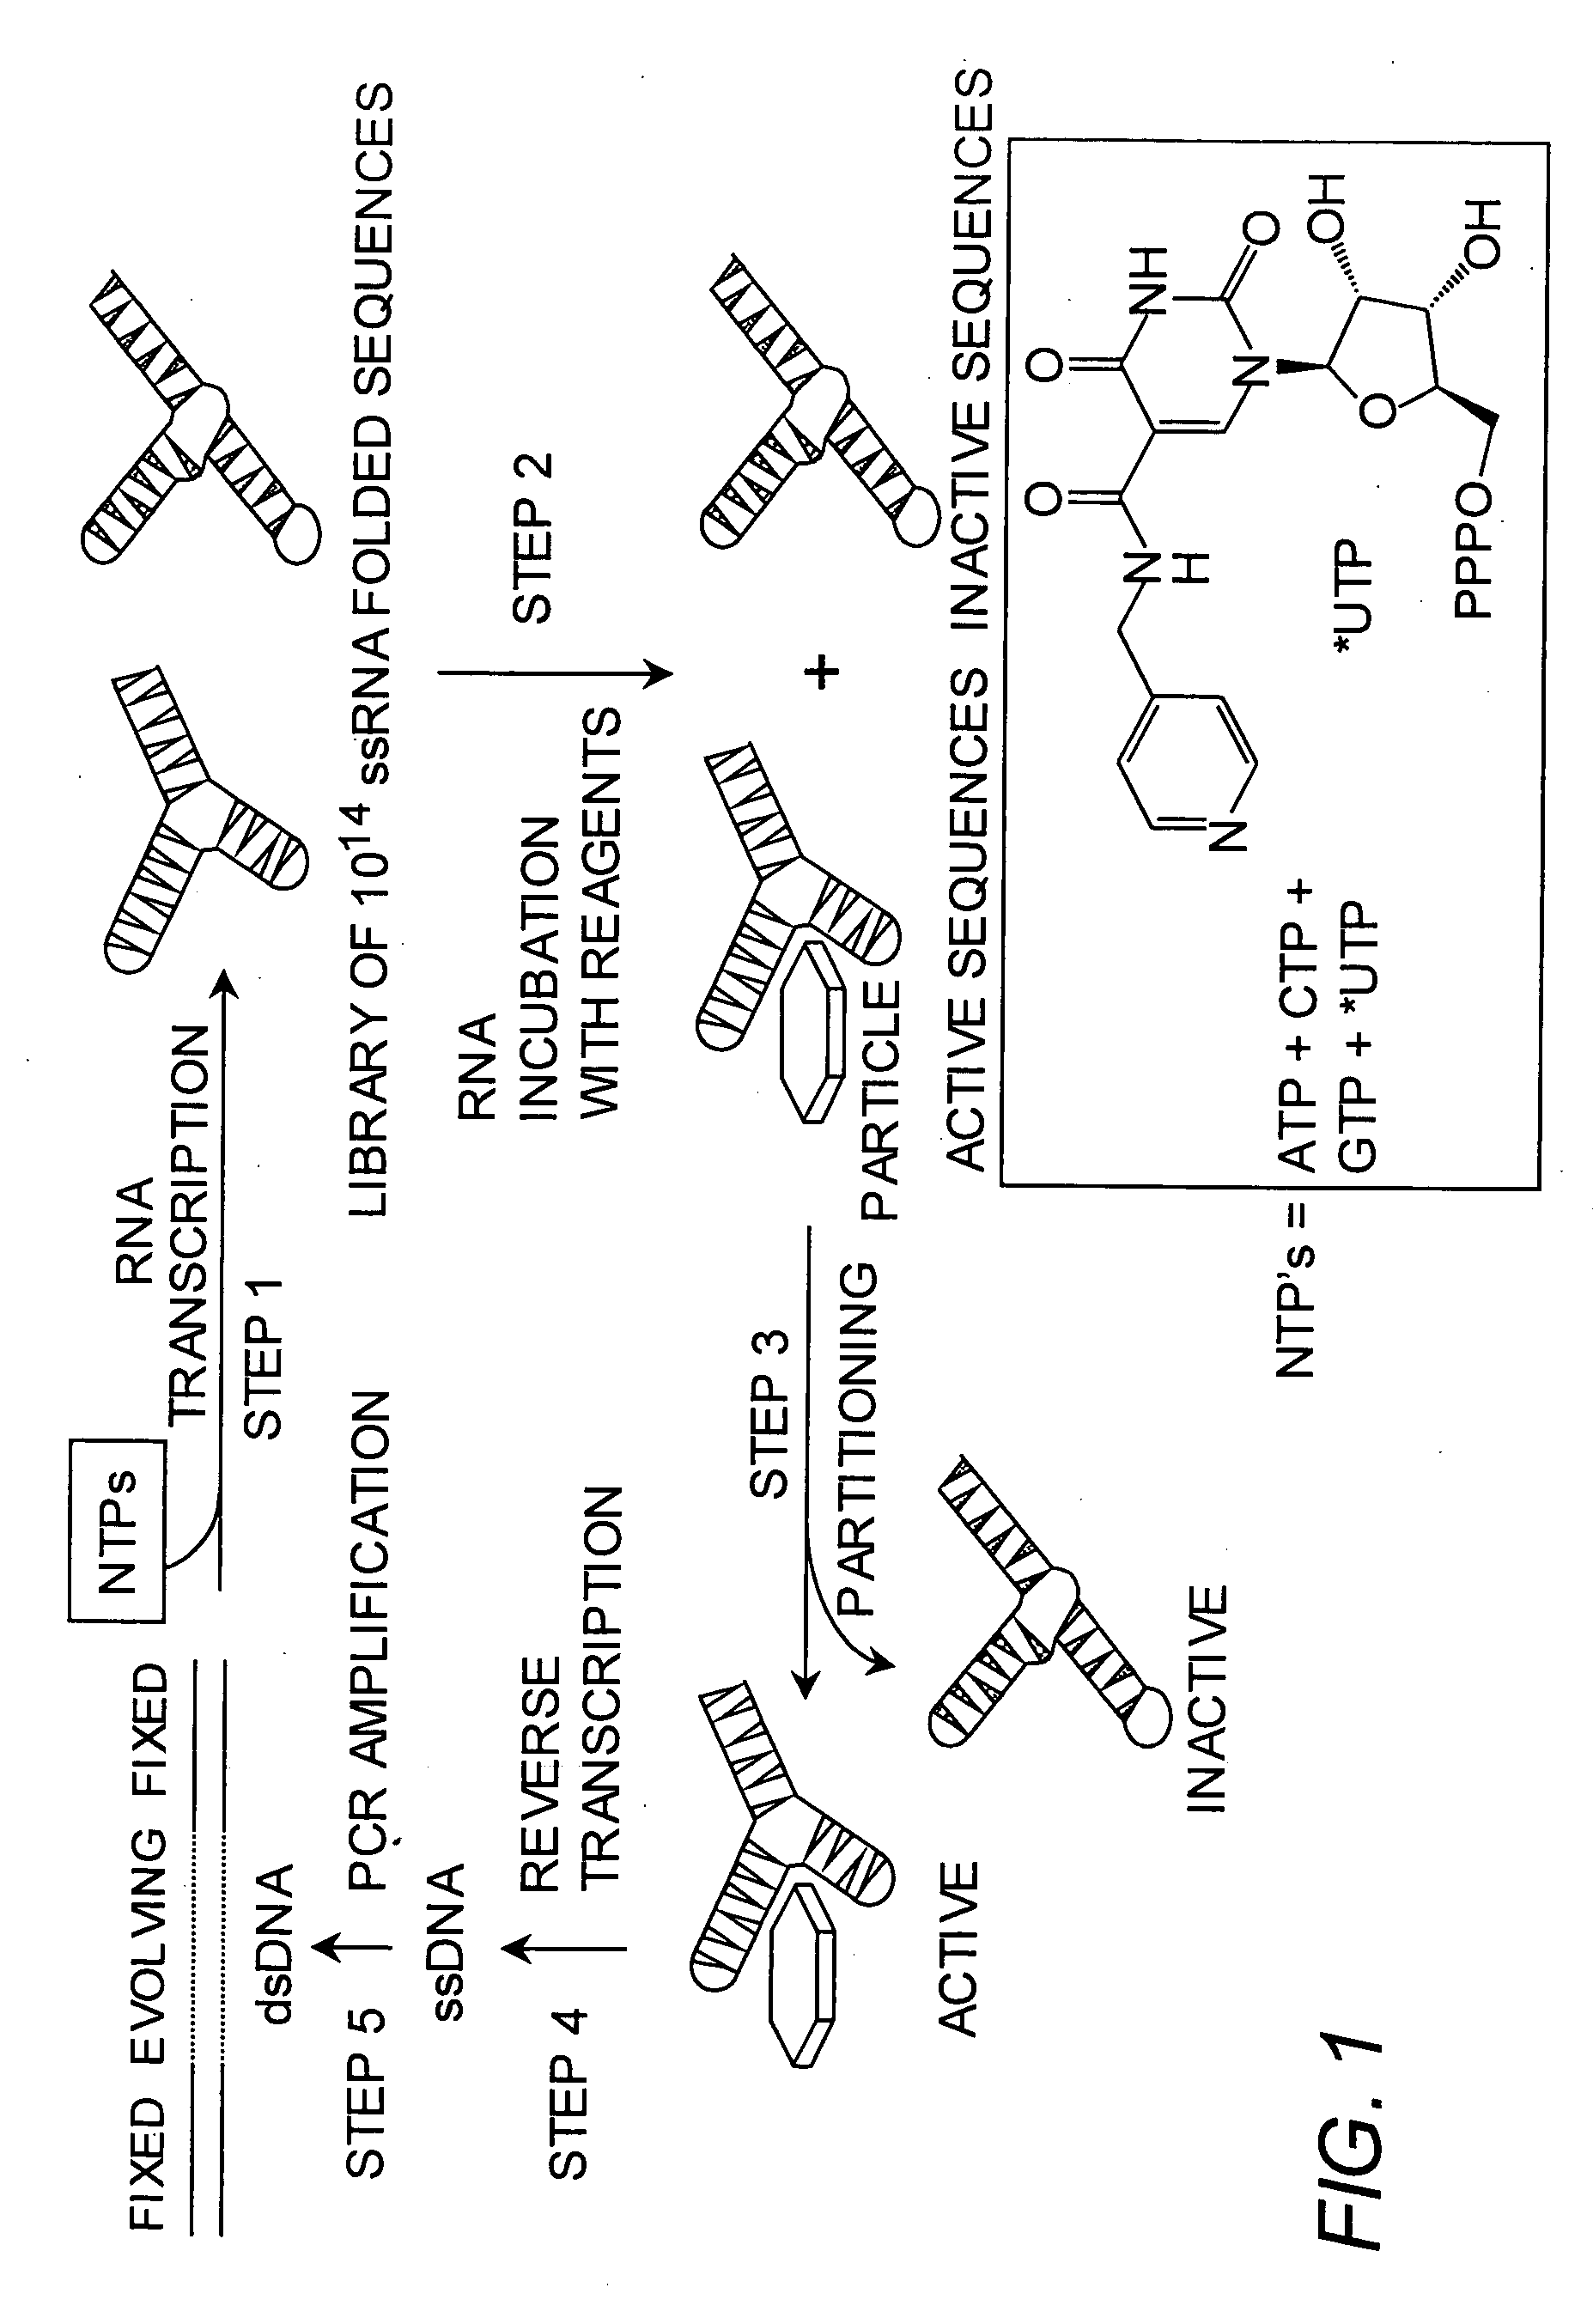 Novel methods of inorganic compound discovery and synthesis